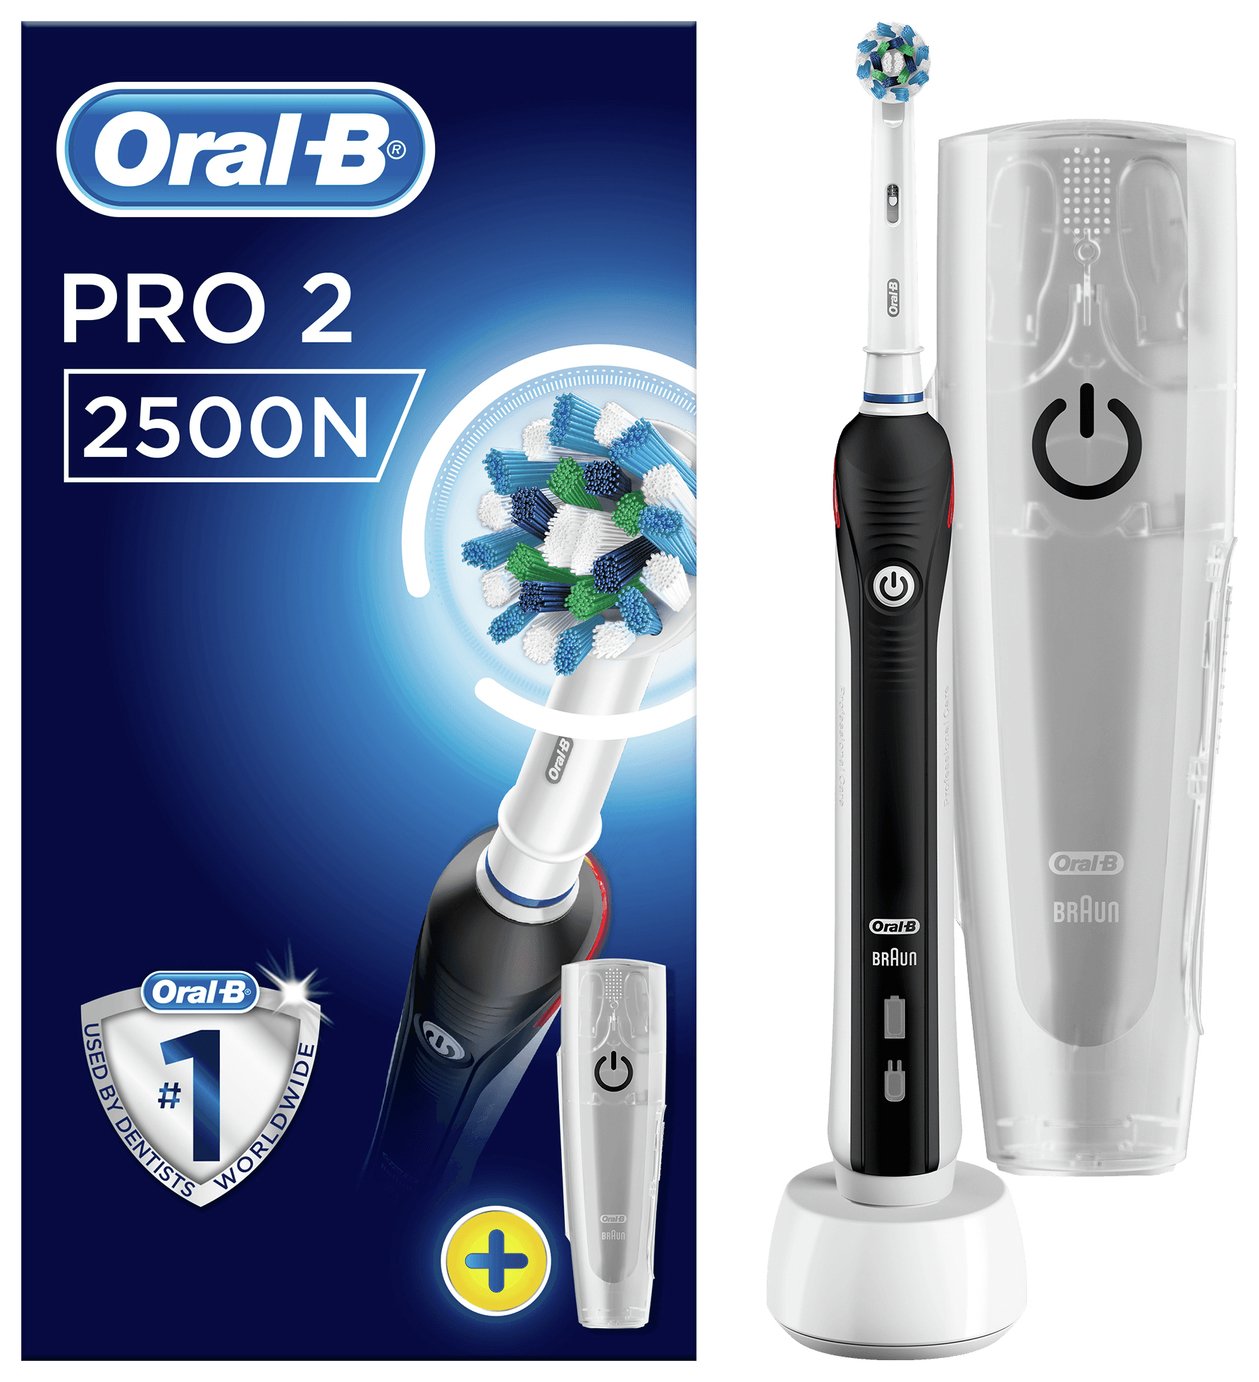 oral-b-pro-2-2500n-crossaction-electric-toothbrush-reviews